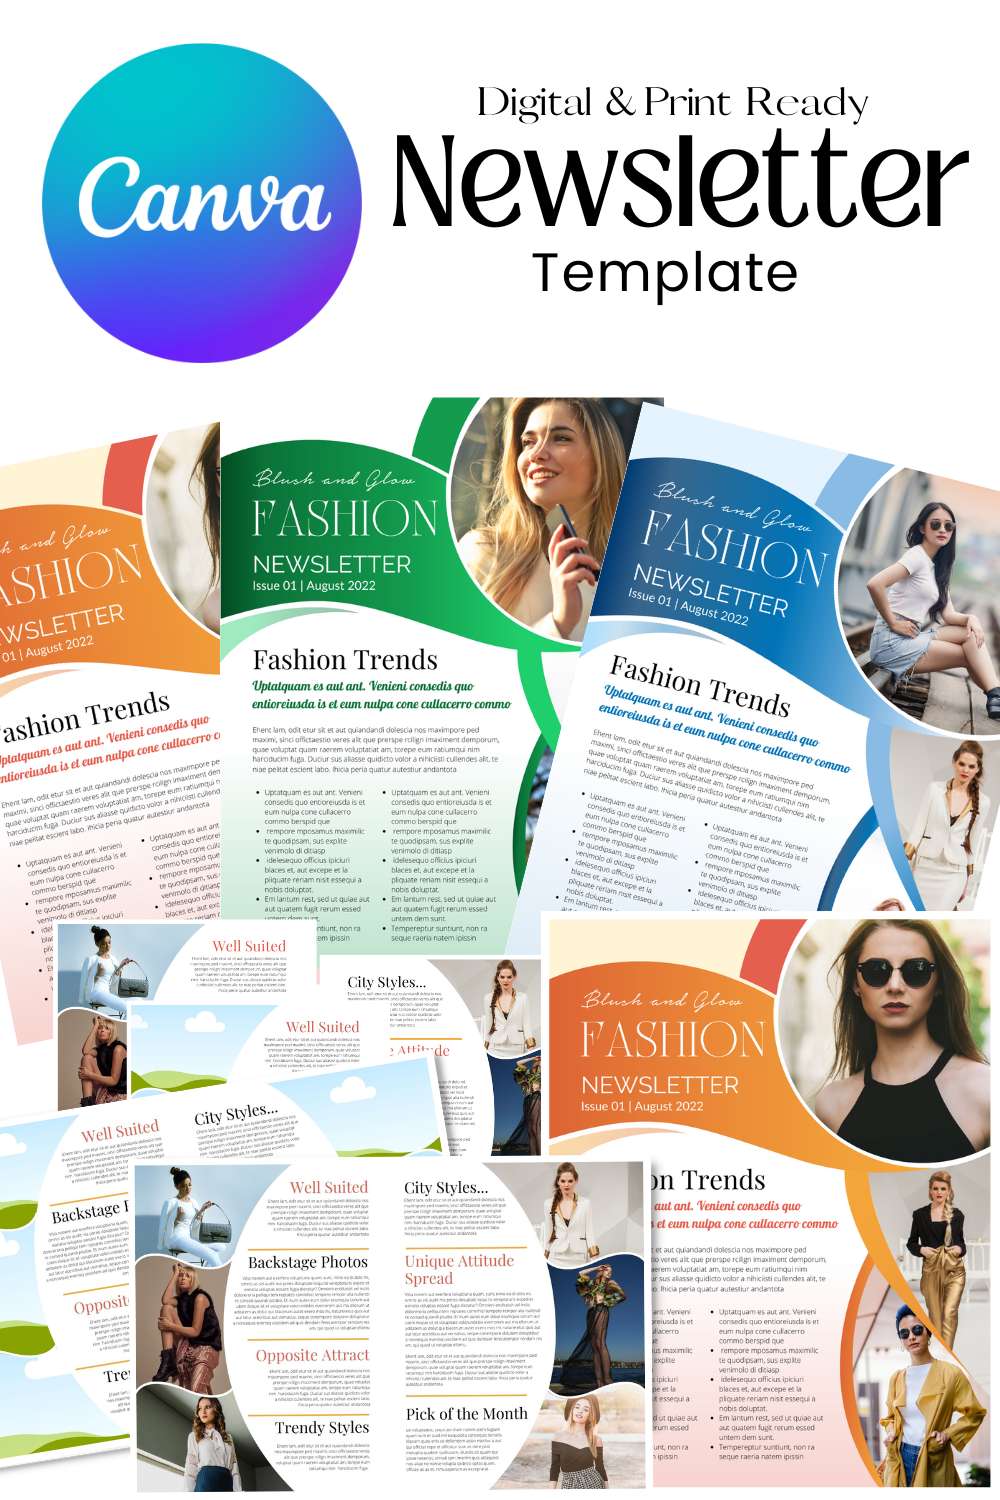 Canva Newsletter Template For Models and Fashion Pinterest collage image.